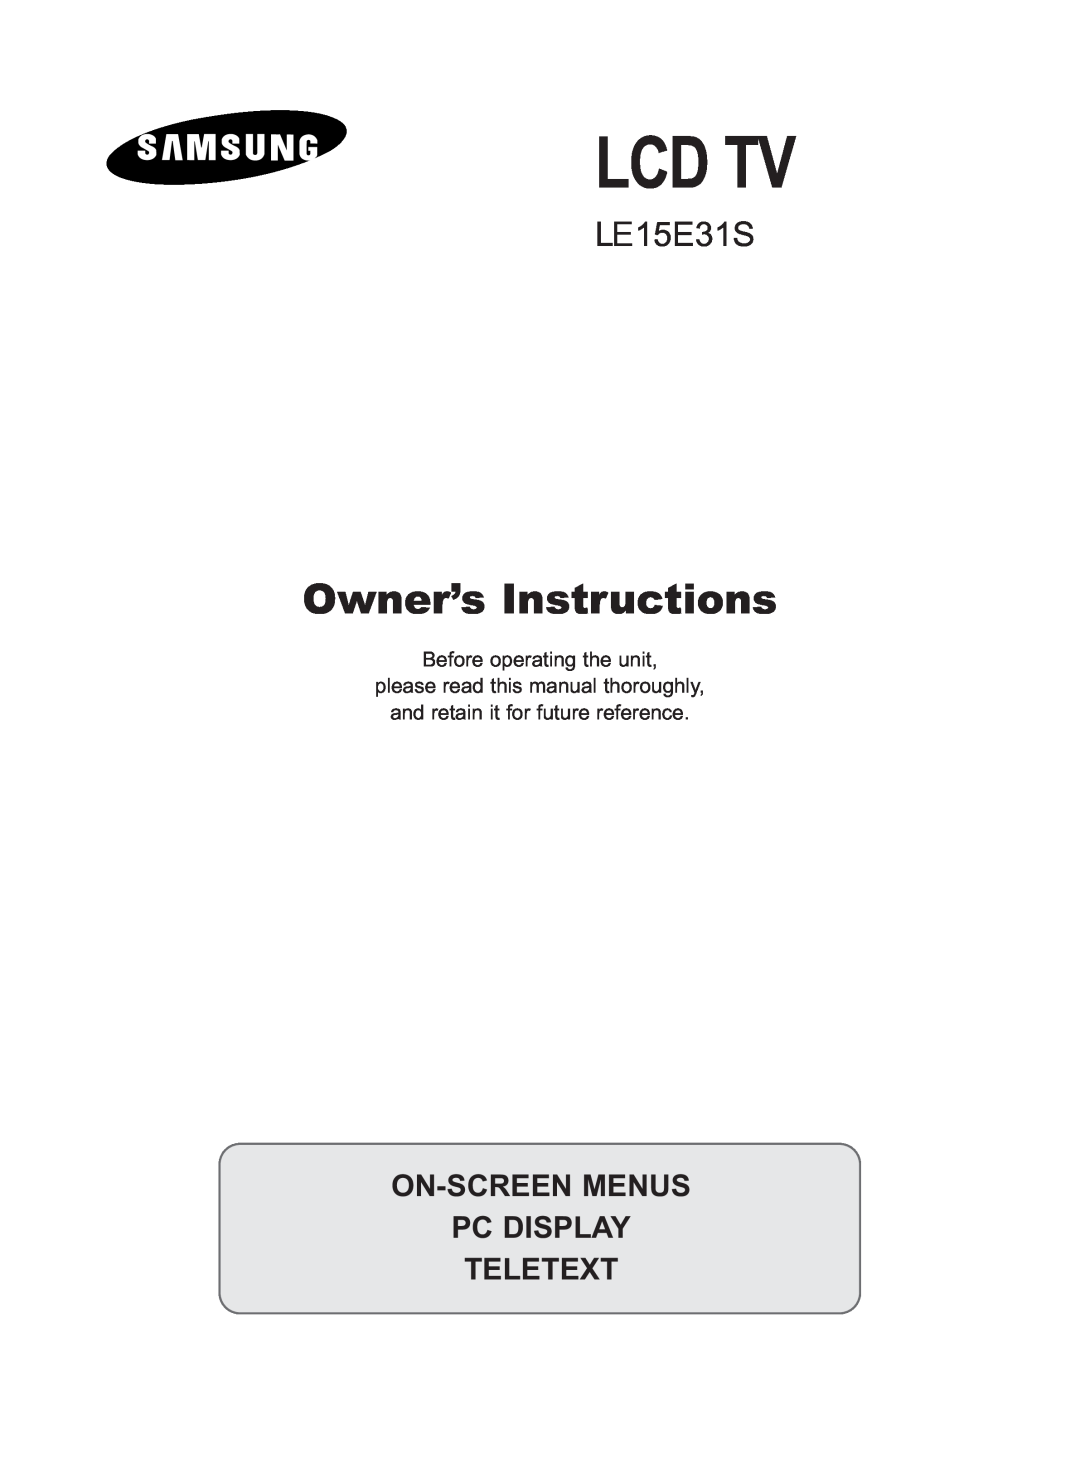 Samsung LE15E31S manual Lcd Tv, Owner’s Instructions, On-Screen Menus Pc Display Teletext, Before operating the unit 